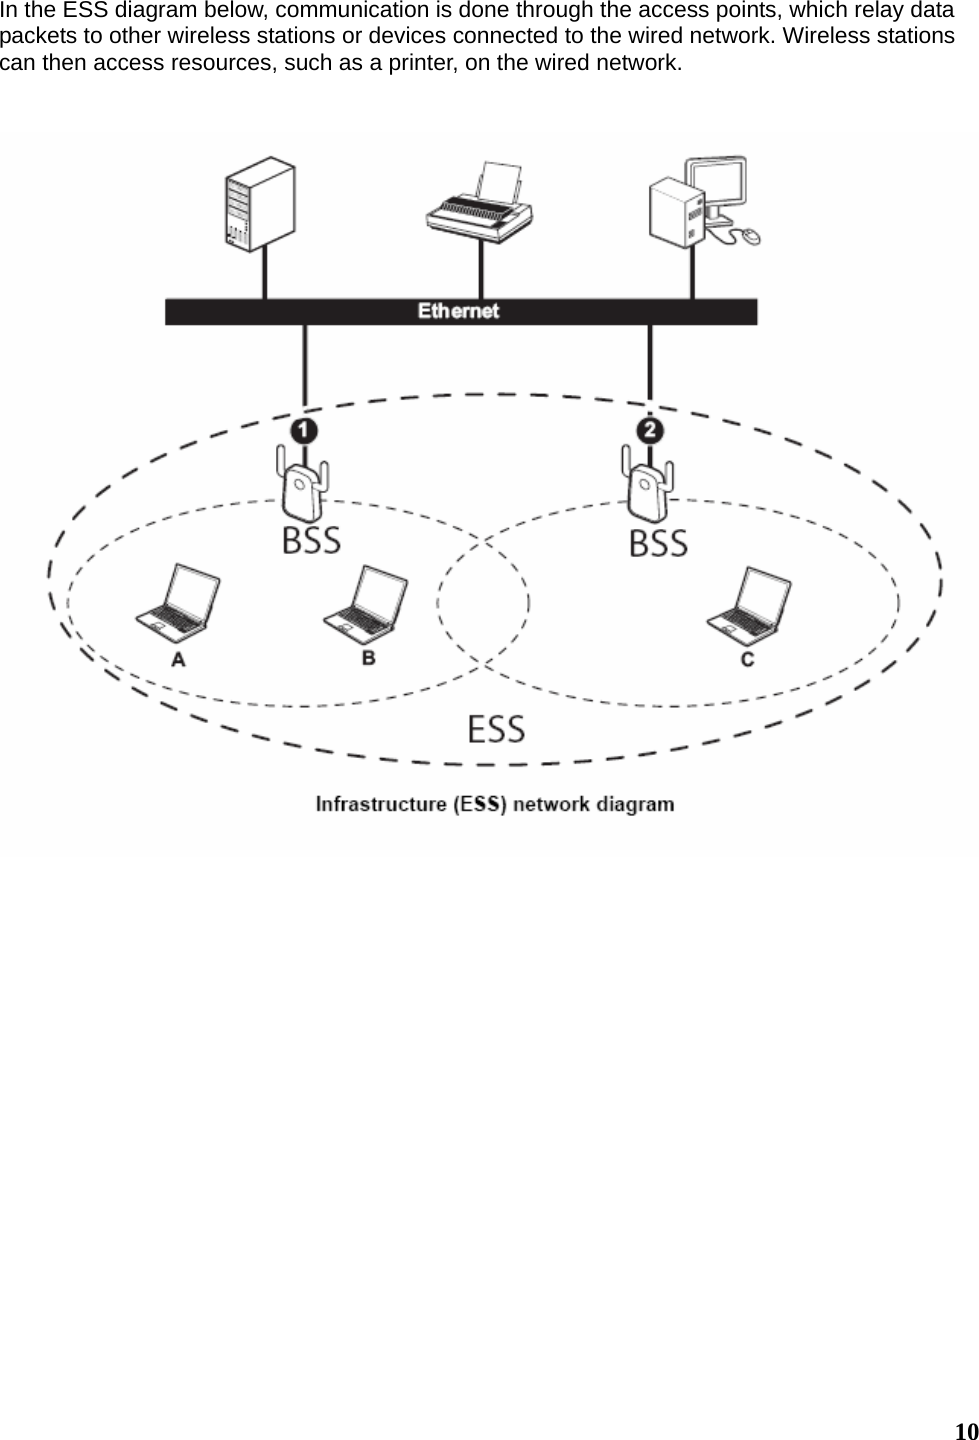  10In the ESS diagram below, communication is done through the access points, which relay data packets to other wireless stations or devices connected to the wired network. Wireless stations can then access resources, such as a printer, on the wired network.                   